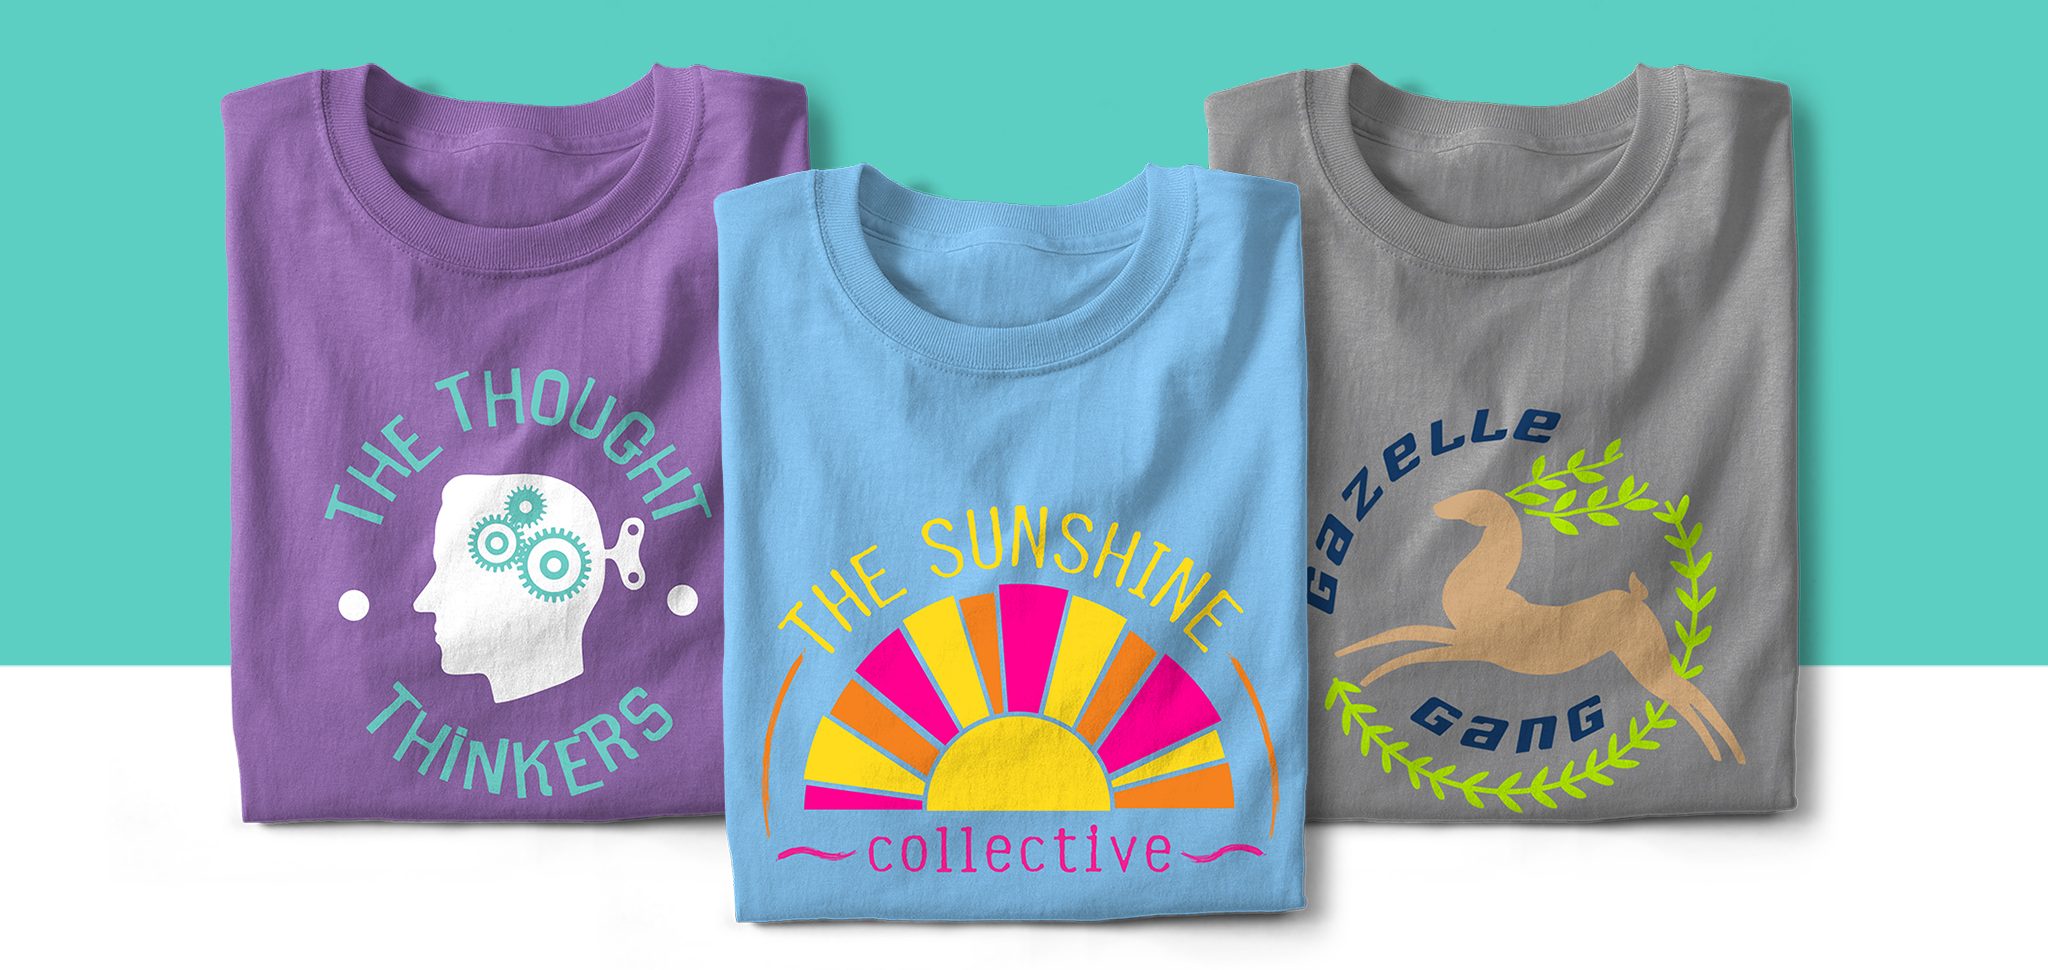 Three folded t-shirts with small group names printed on them. The names are The Thought Thinkers, The Sunshine Collective, and Gazelle Gang.